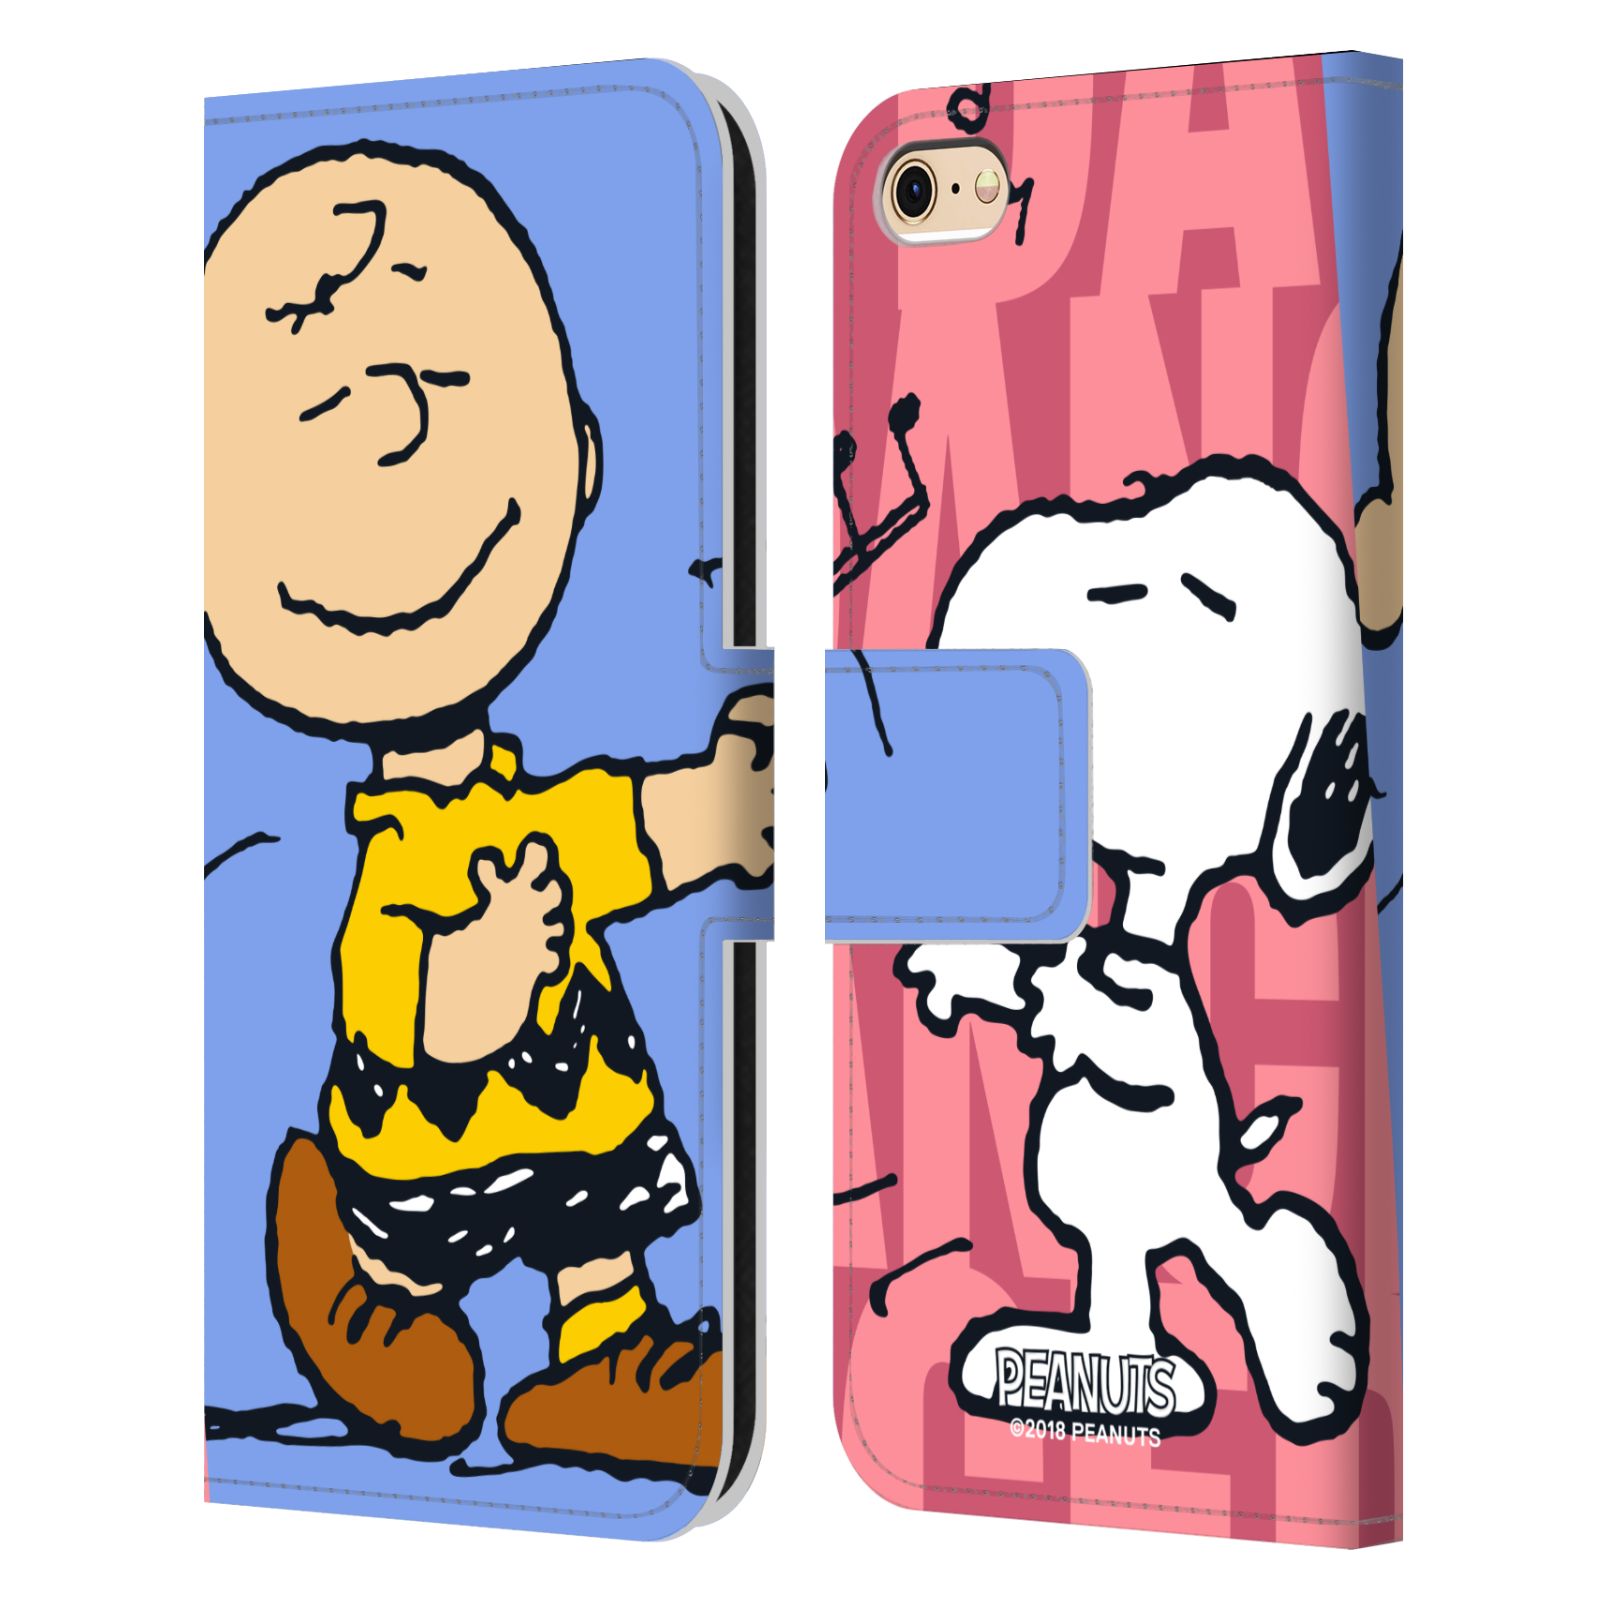 Pouzdro na mobil Apple Iphone 6 / 6S - Head Case - Peanuts - Snoopy a Charlie